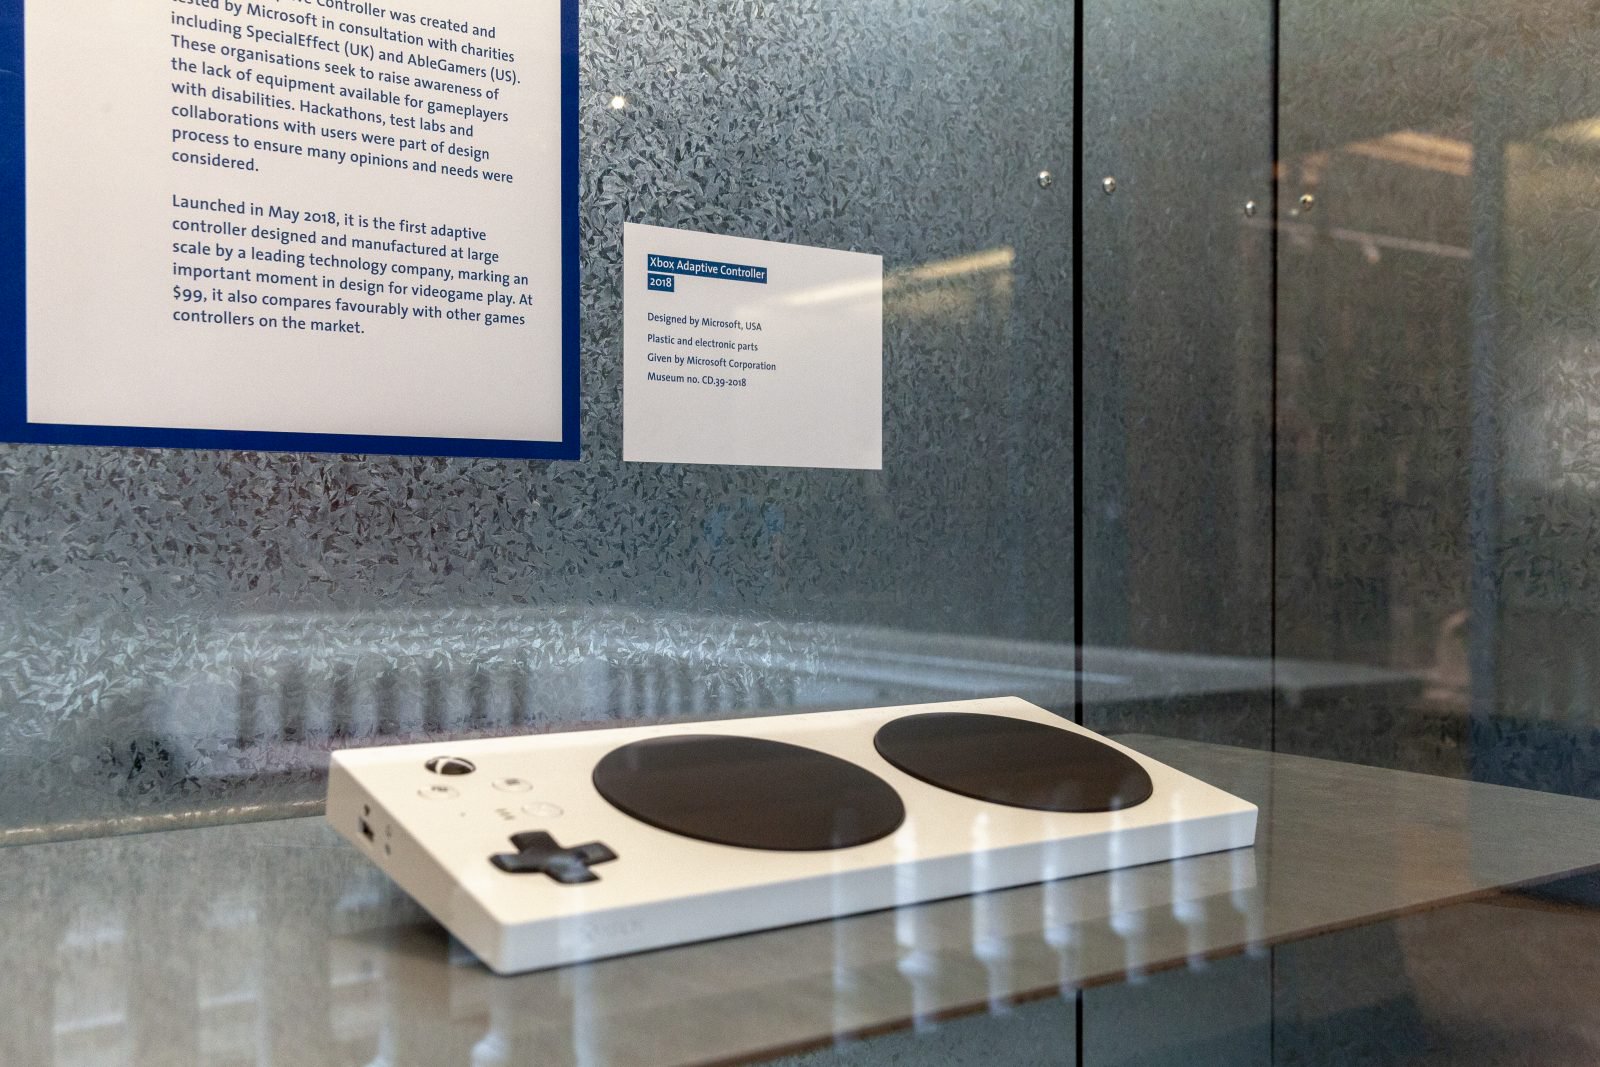 Xbox Adaptive Controller on display at the V&A Museum